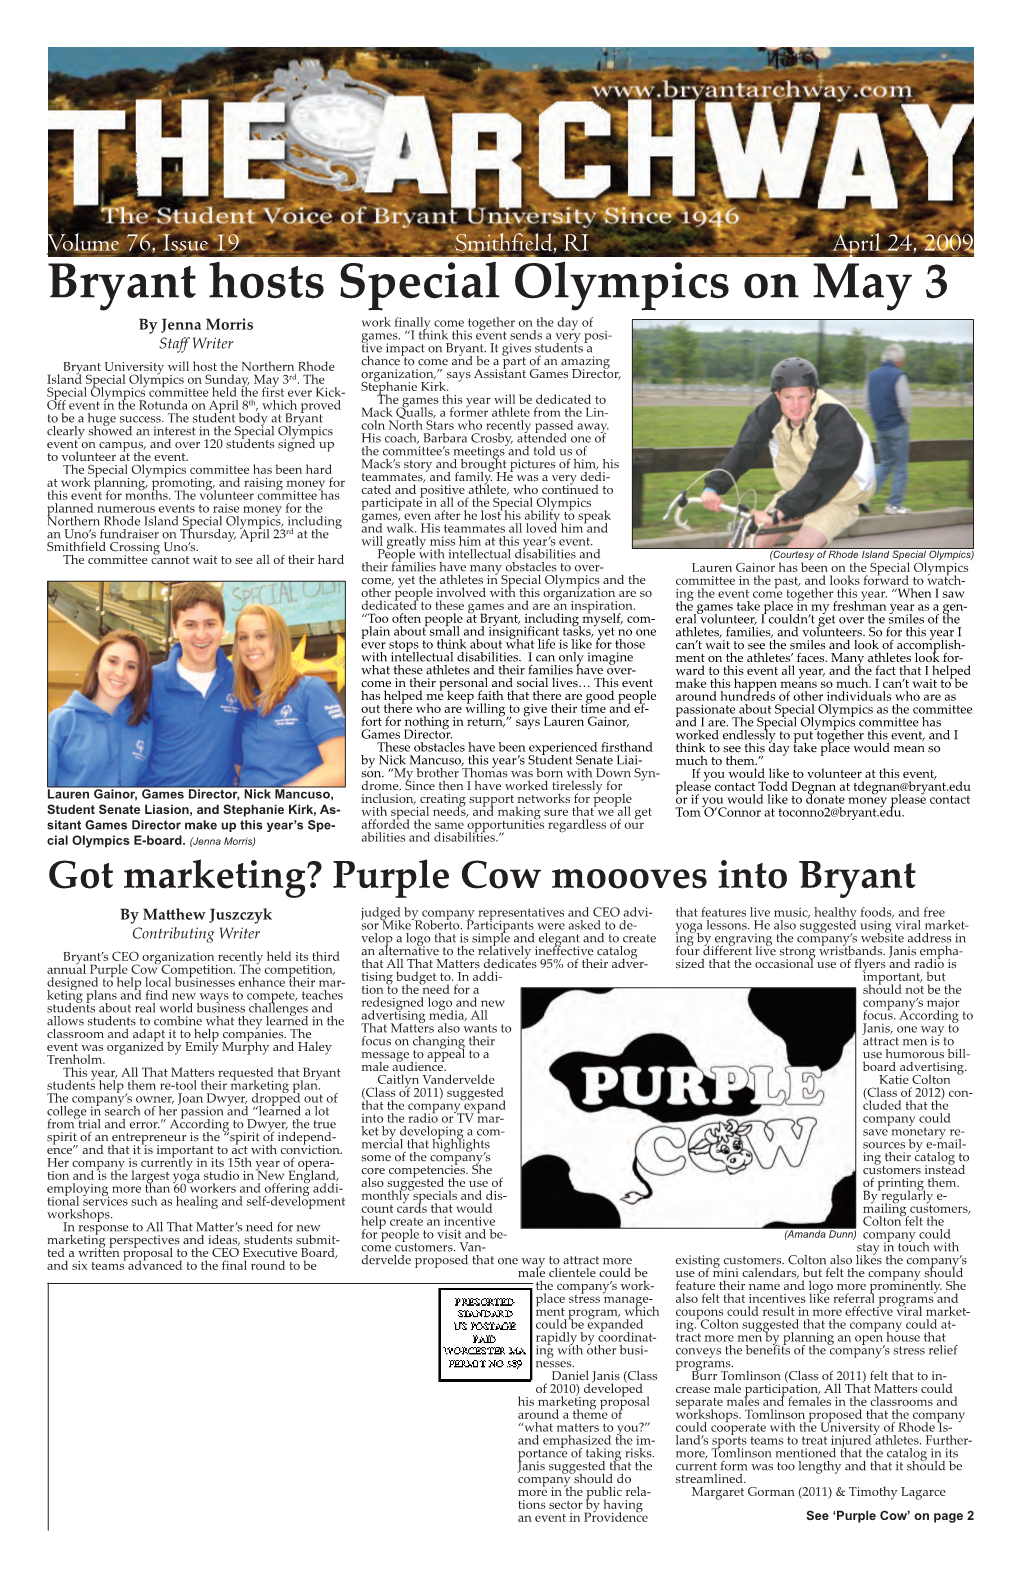 Bryant Hosts Special Olympics on May 3 by Jenna Morris Work Finally Come Together on the Day of Games